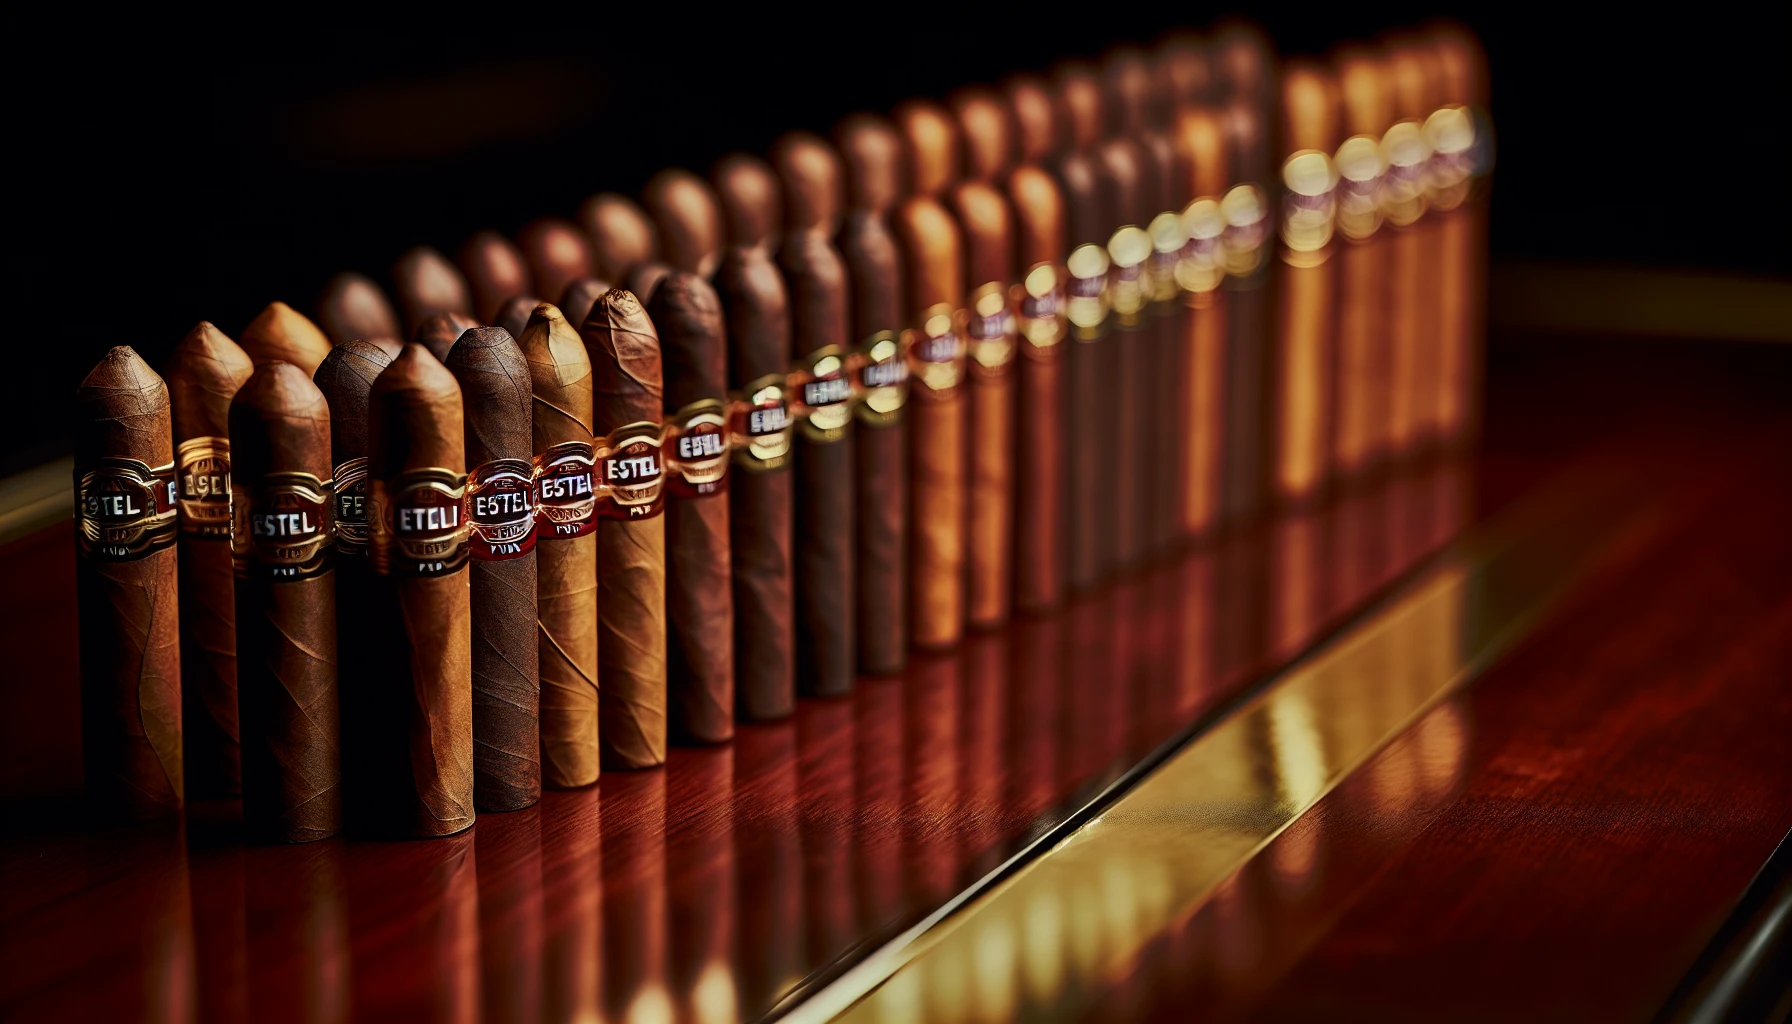 Variety of Diesel Estelí Puro cigars in different sizes and shapes